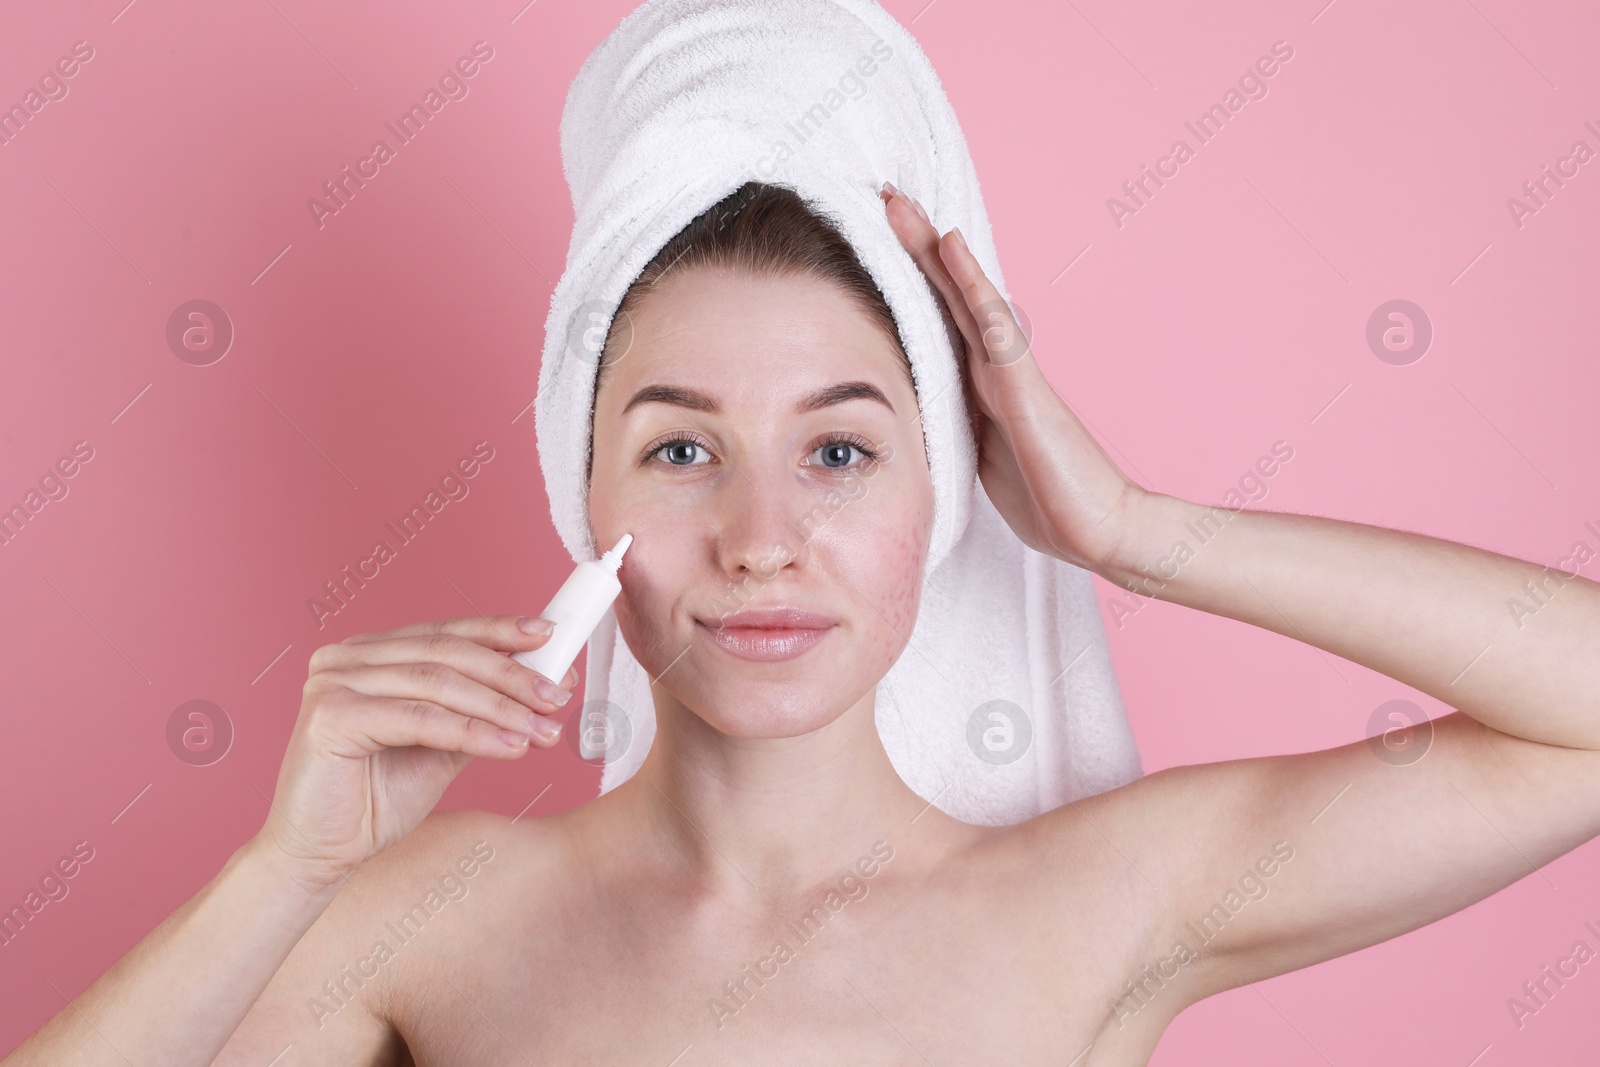 Photo of Young woman with acne problem applying cosmetic product onto her skin on pink background